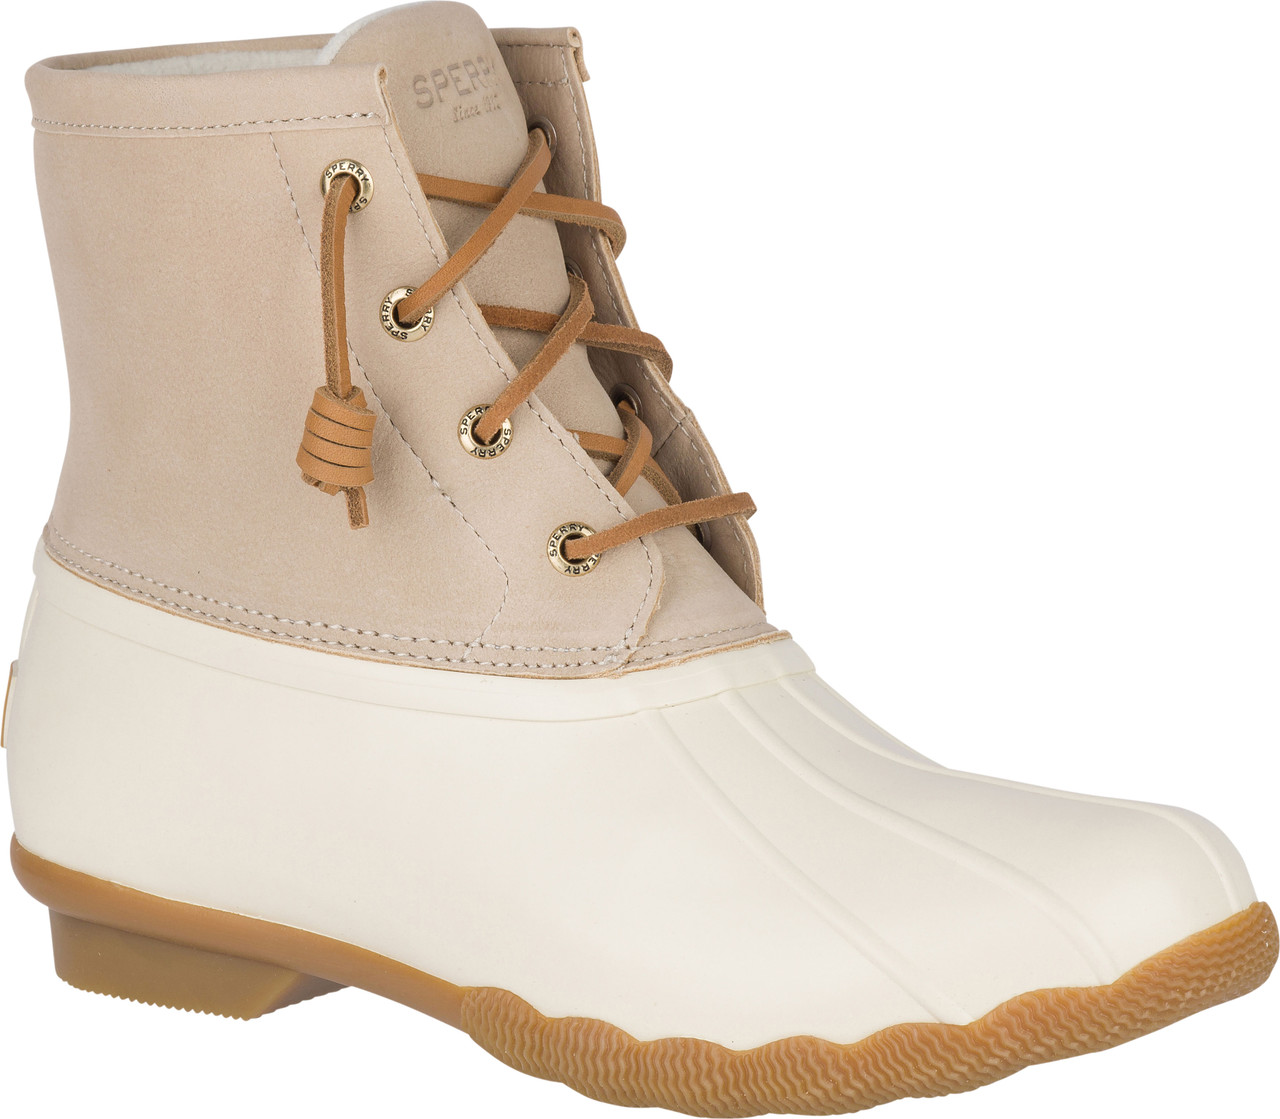 sperry saltwater boots womens